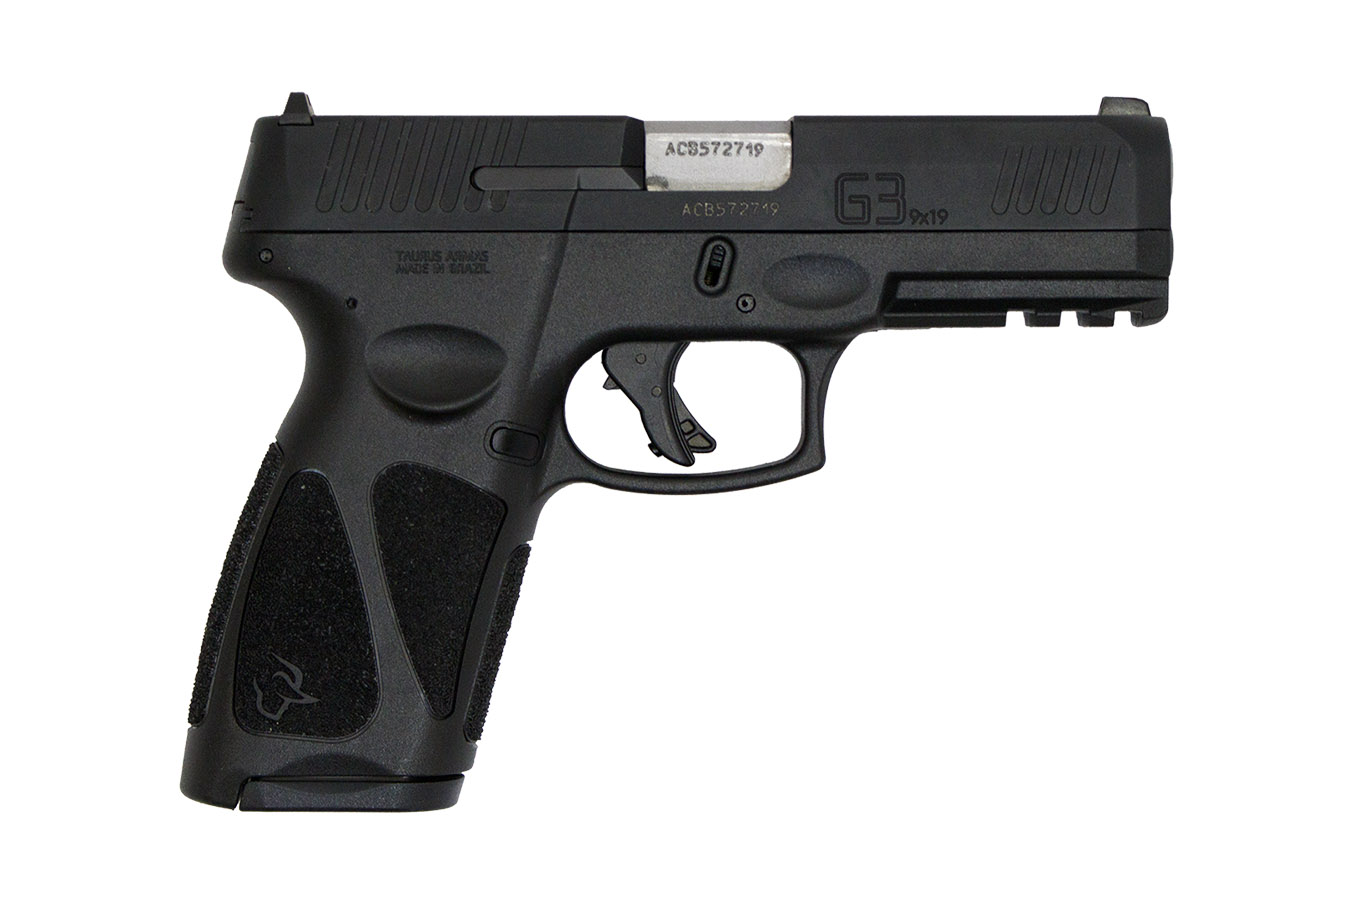 TAURUS G3 9MM PISTOL WITH 15 RND MAG AND MANUAL SAFETY